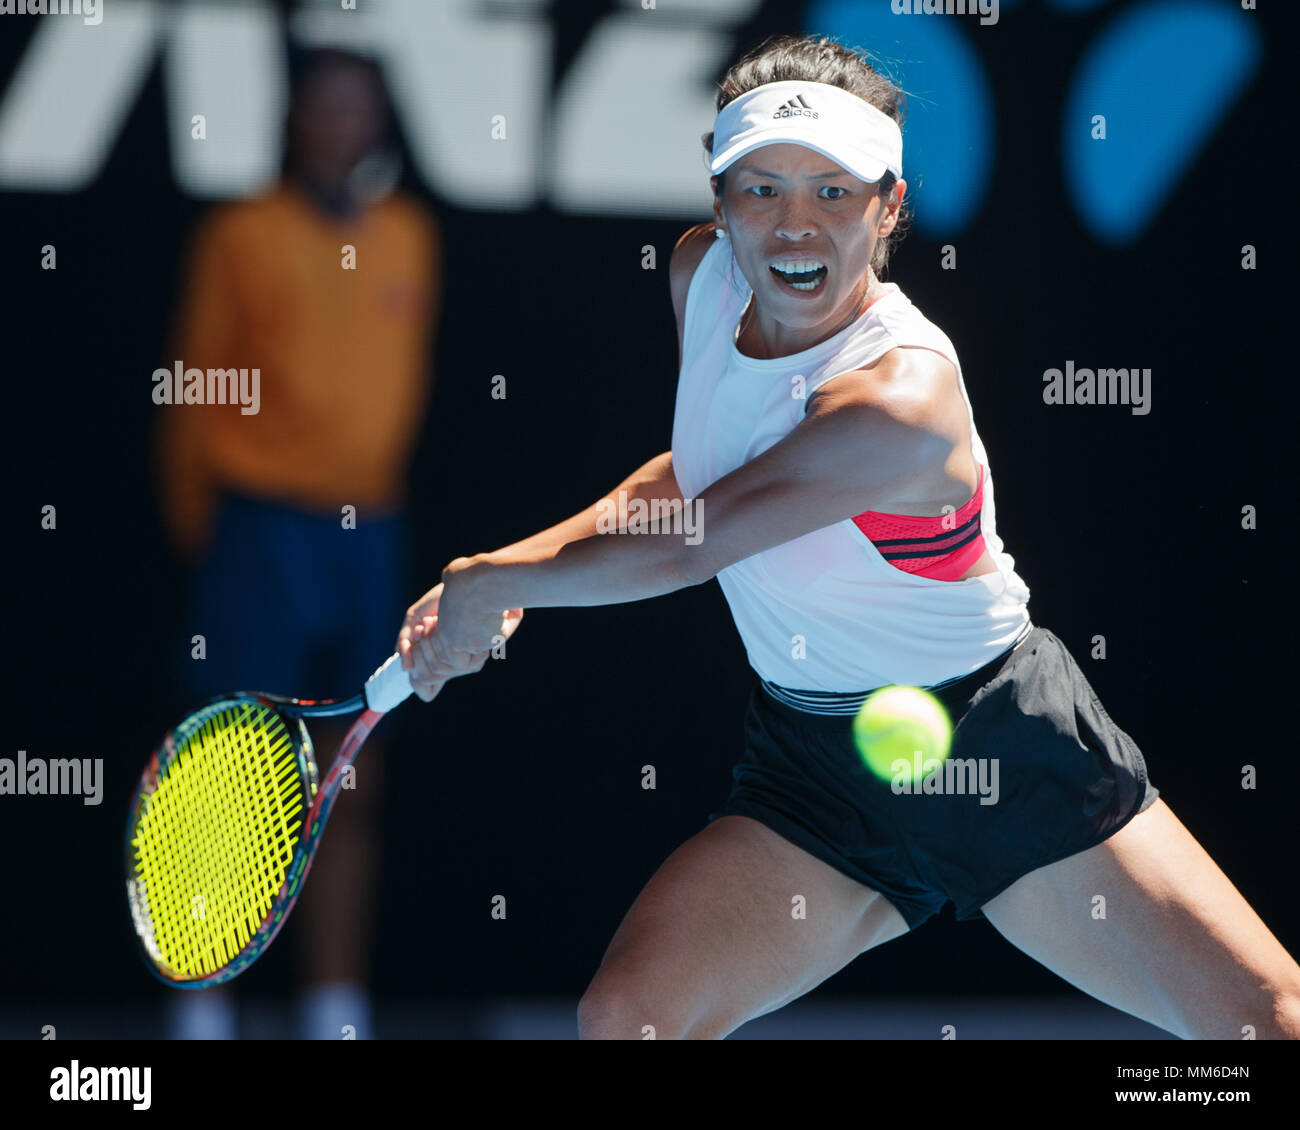 Taiwanese tennis player Su-Wei Hsieh playing backhand shot in Australian  Open 2018 Tennis Tournament, Melbourne Park, Melbourne, Victoria, Australia  Stock Photo - Alamy